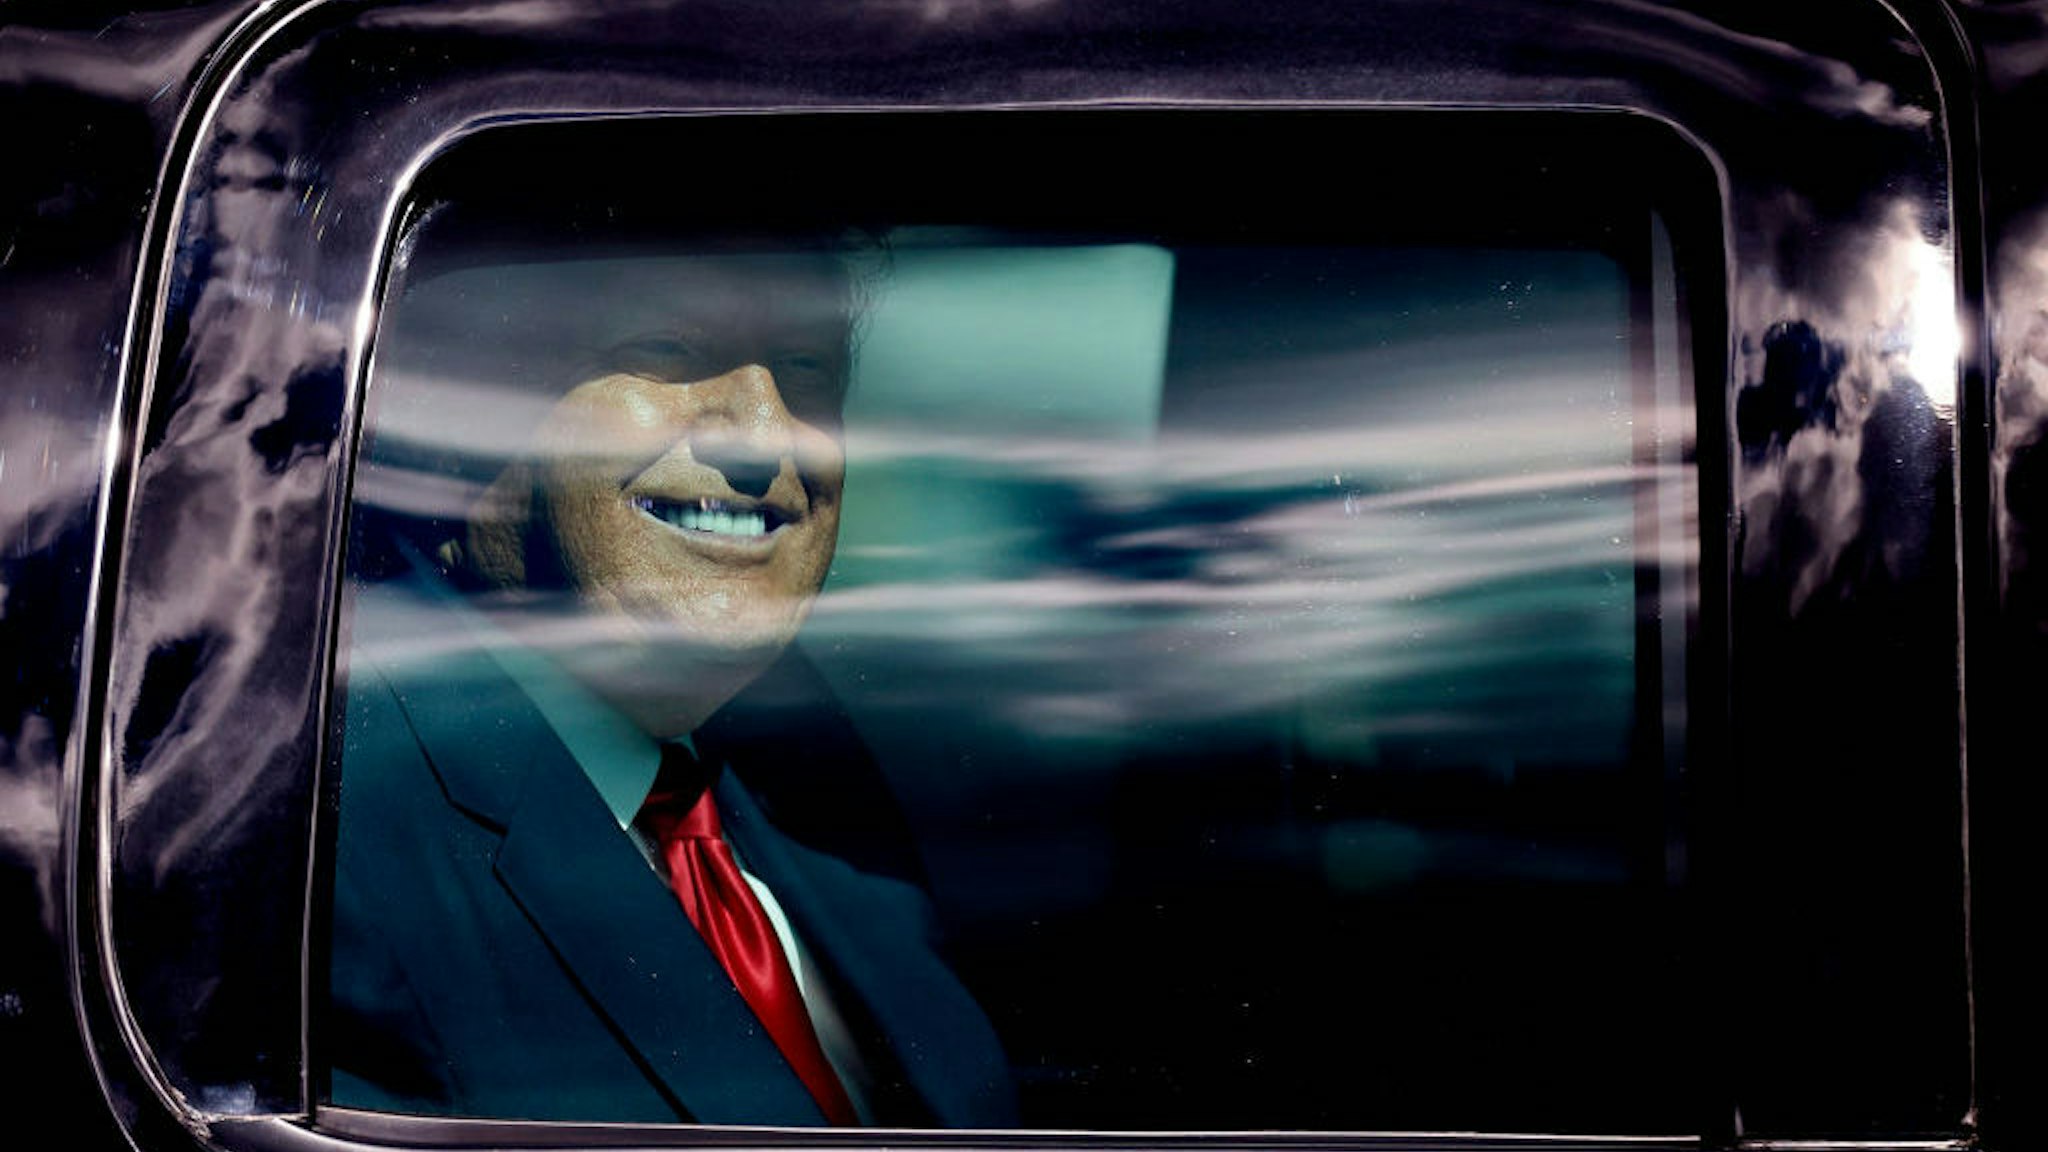 WEST PALM BEACH, FLORIDA - JANUARY 20: Outgoing US President Donald Trump waves to supporters lined along on the route to his Mar-a-Lago estate on January 20, 2021 in West Palm Beach, Florida. Trump, the first president in more than 150 years to refuse to attend his successor's inauguration, is expected to spend the final minutes of his presidency at his Mar-a-Lago estate in Florida. (Photo by Michael Reaves/Getty Images)